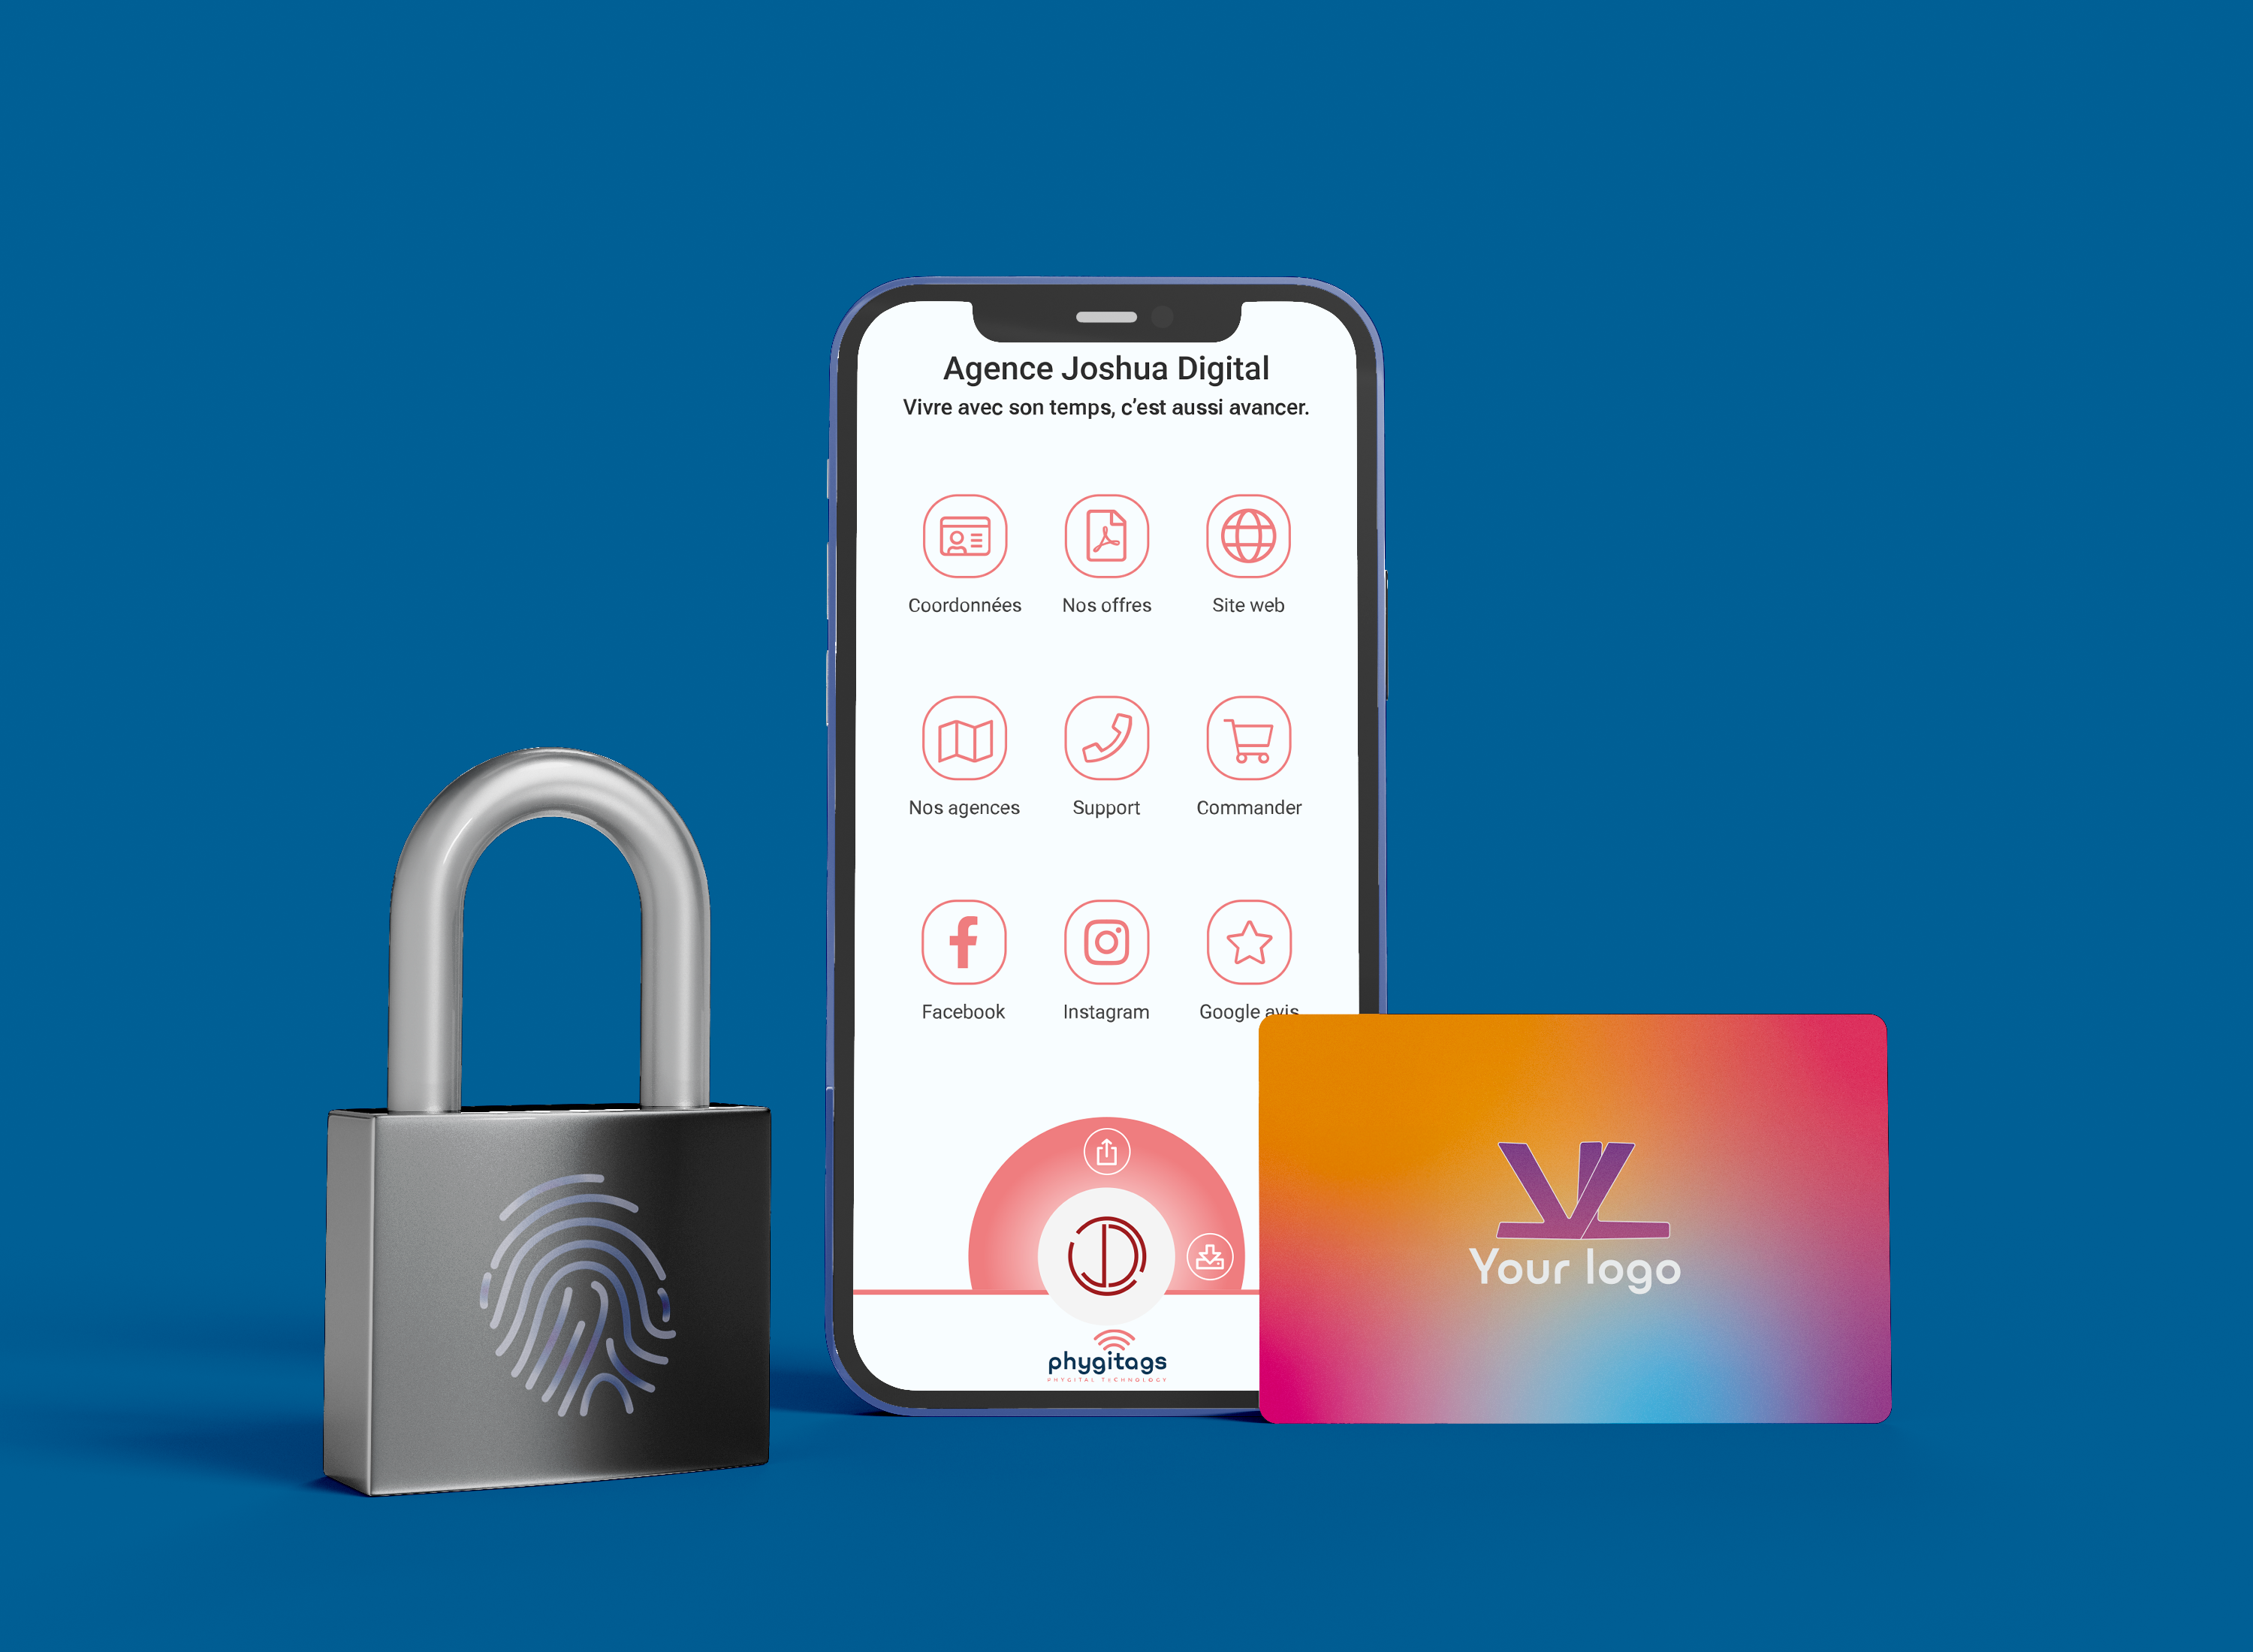 Connected card data is secured